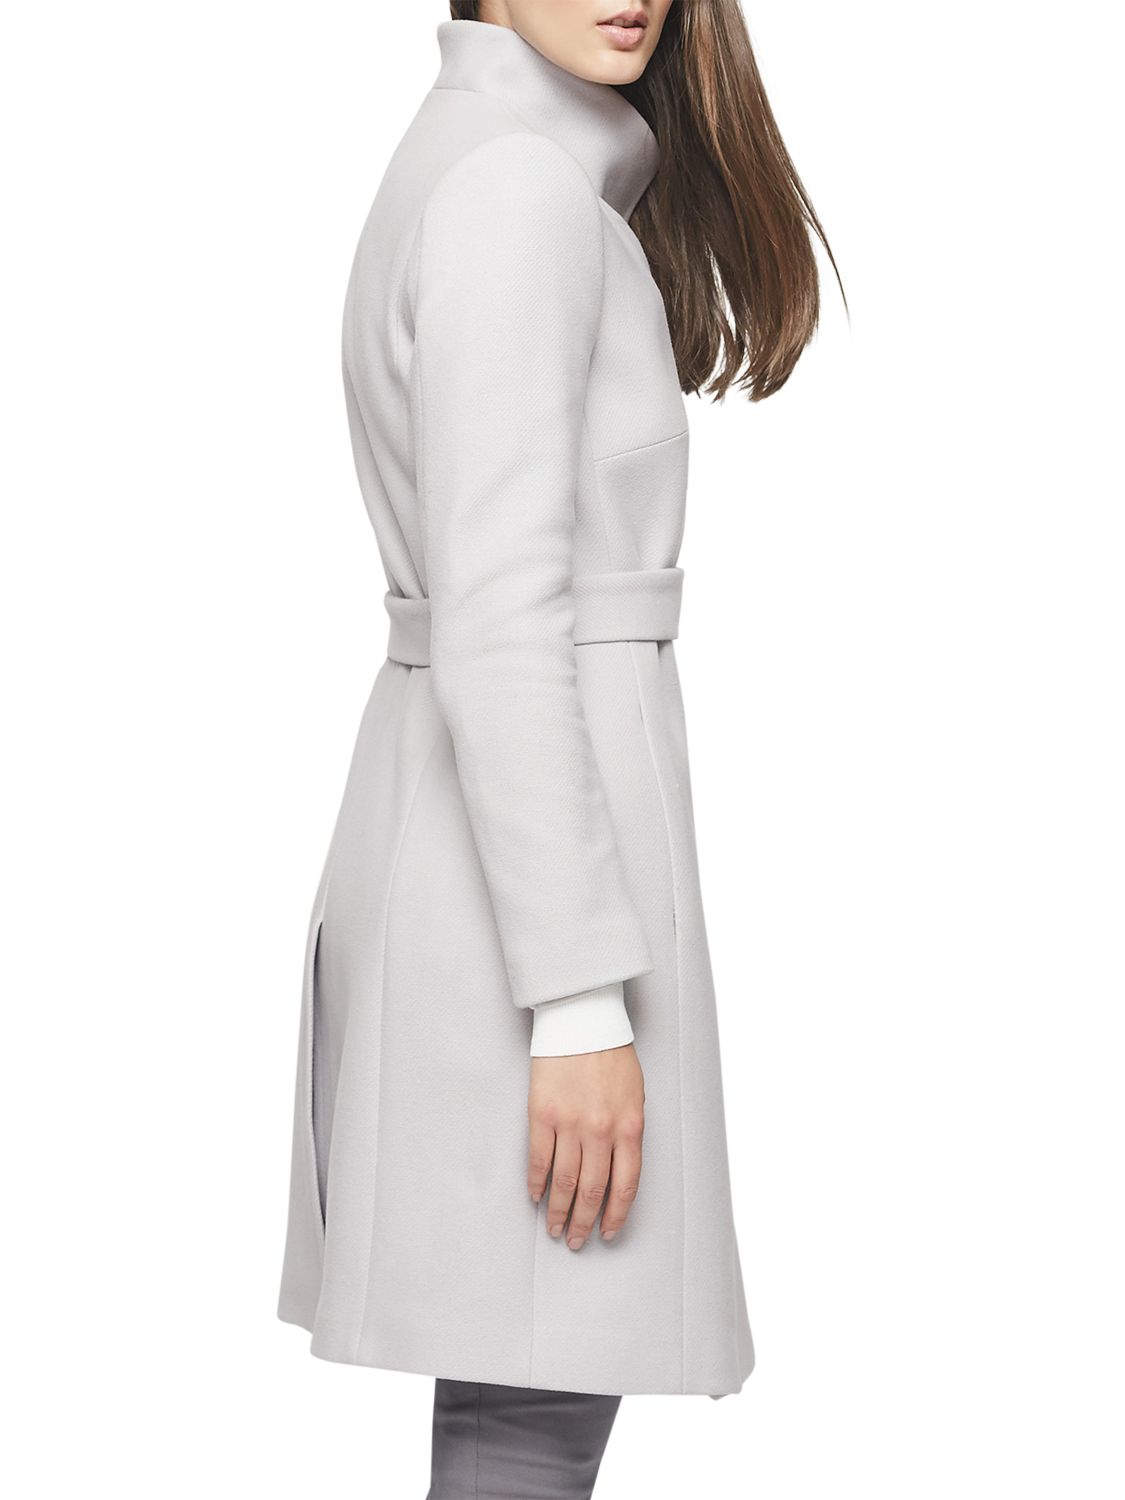 Reiss Harri Belted Wrap Collar Trench Coat at John Lewis & Partners